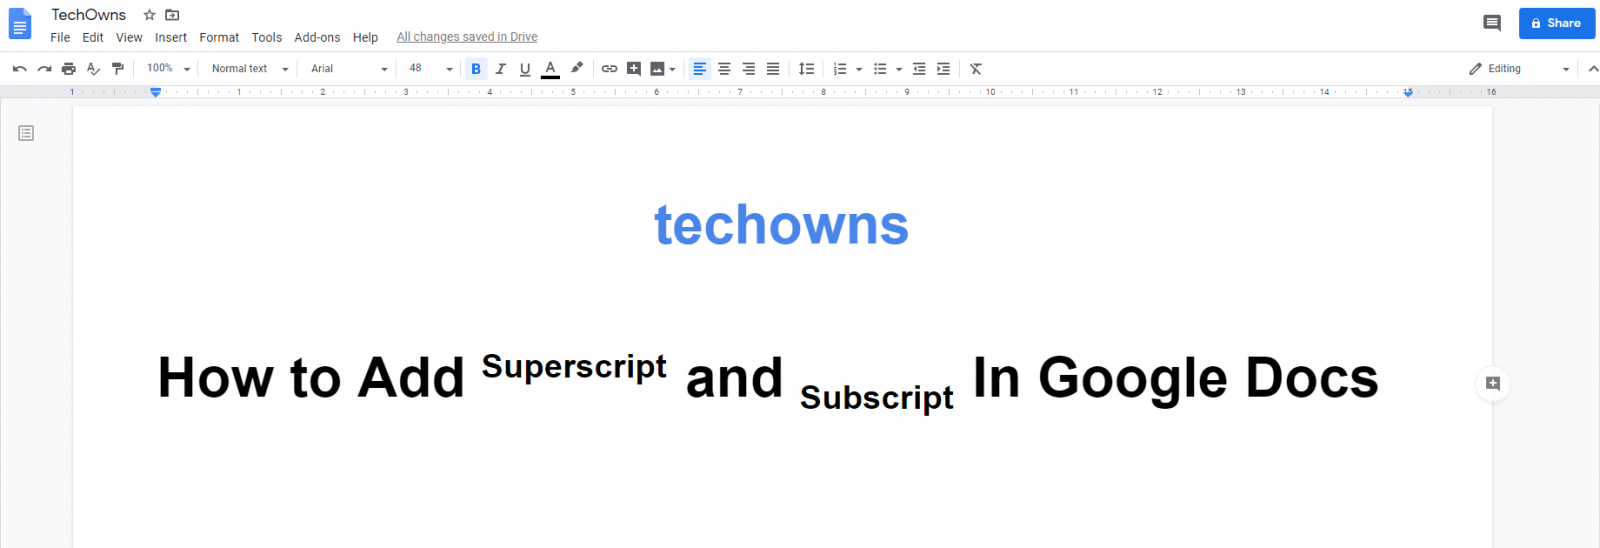 How to Superscript and Subscript In Google Docs [12 Easy Ways